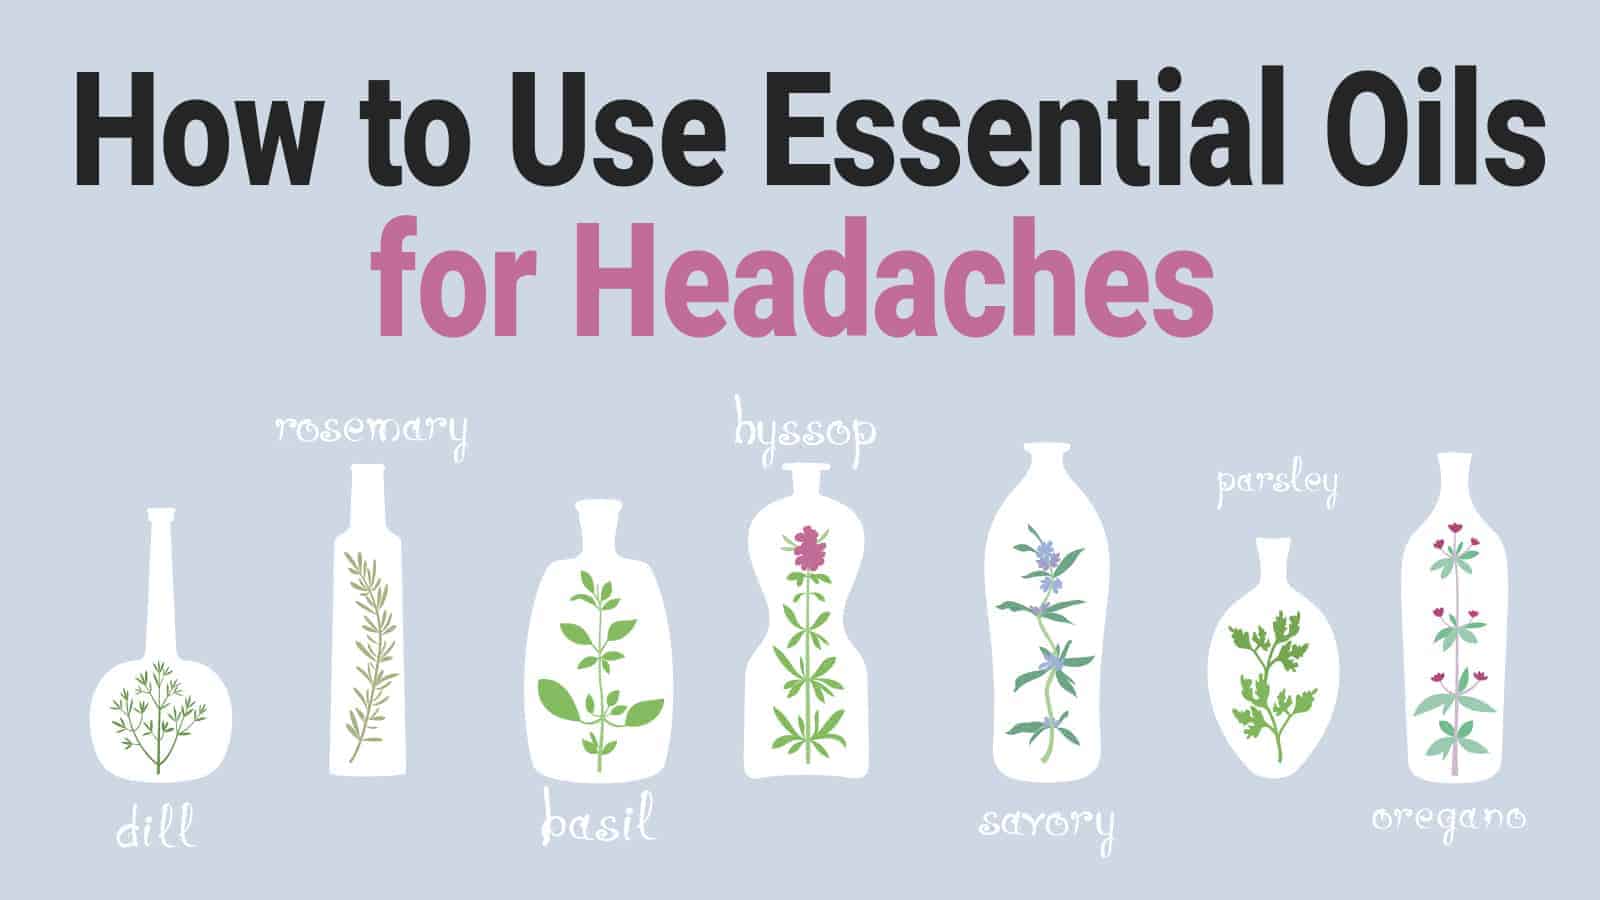 How to Use Essential Oils for Headaches